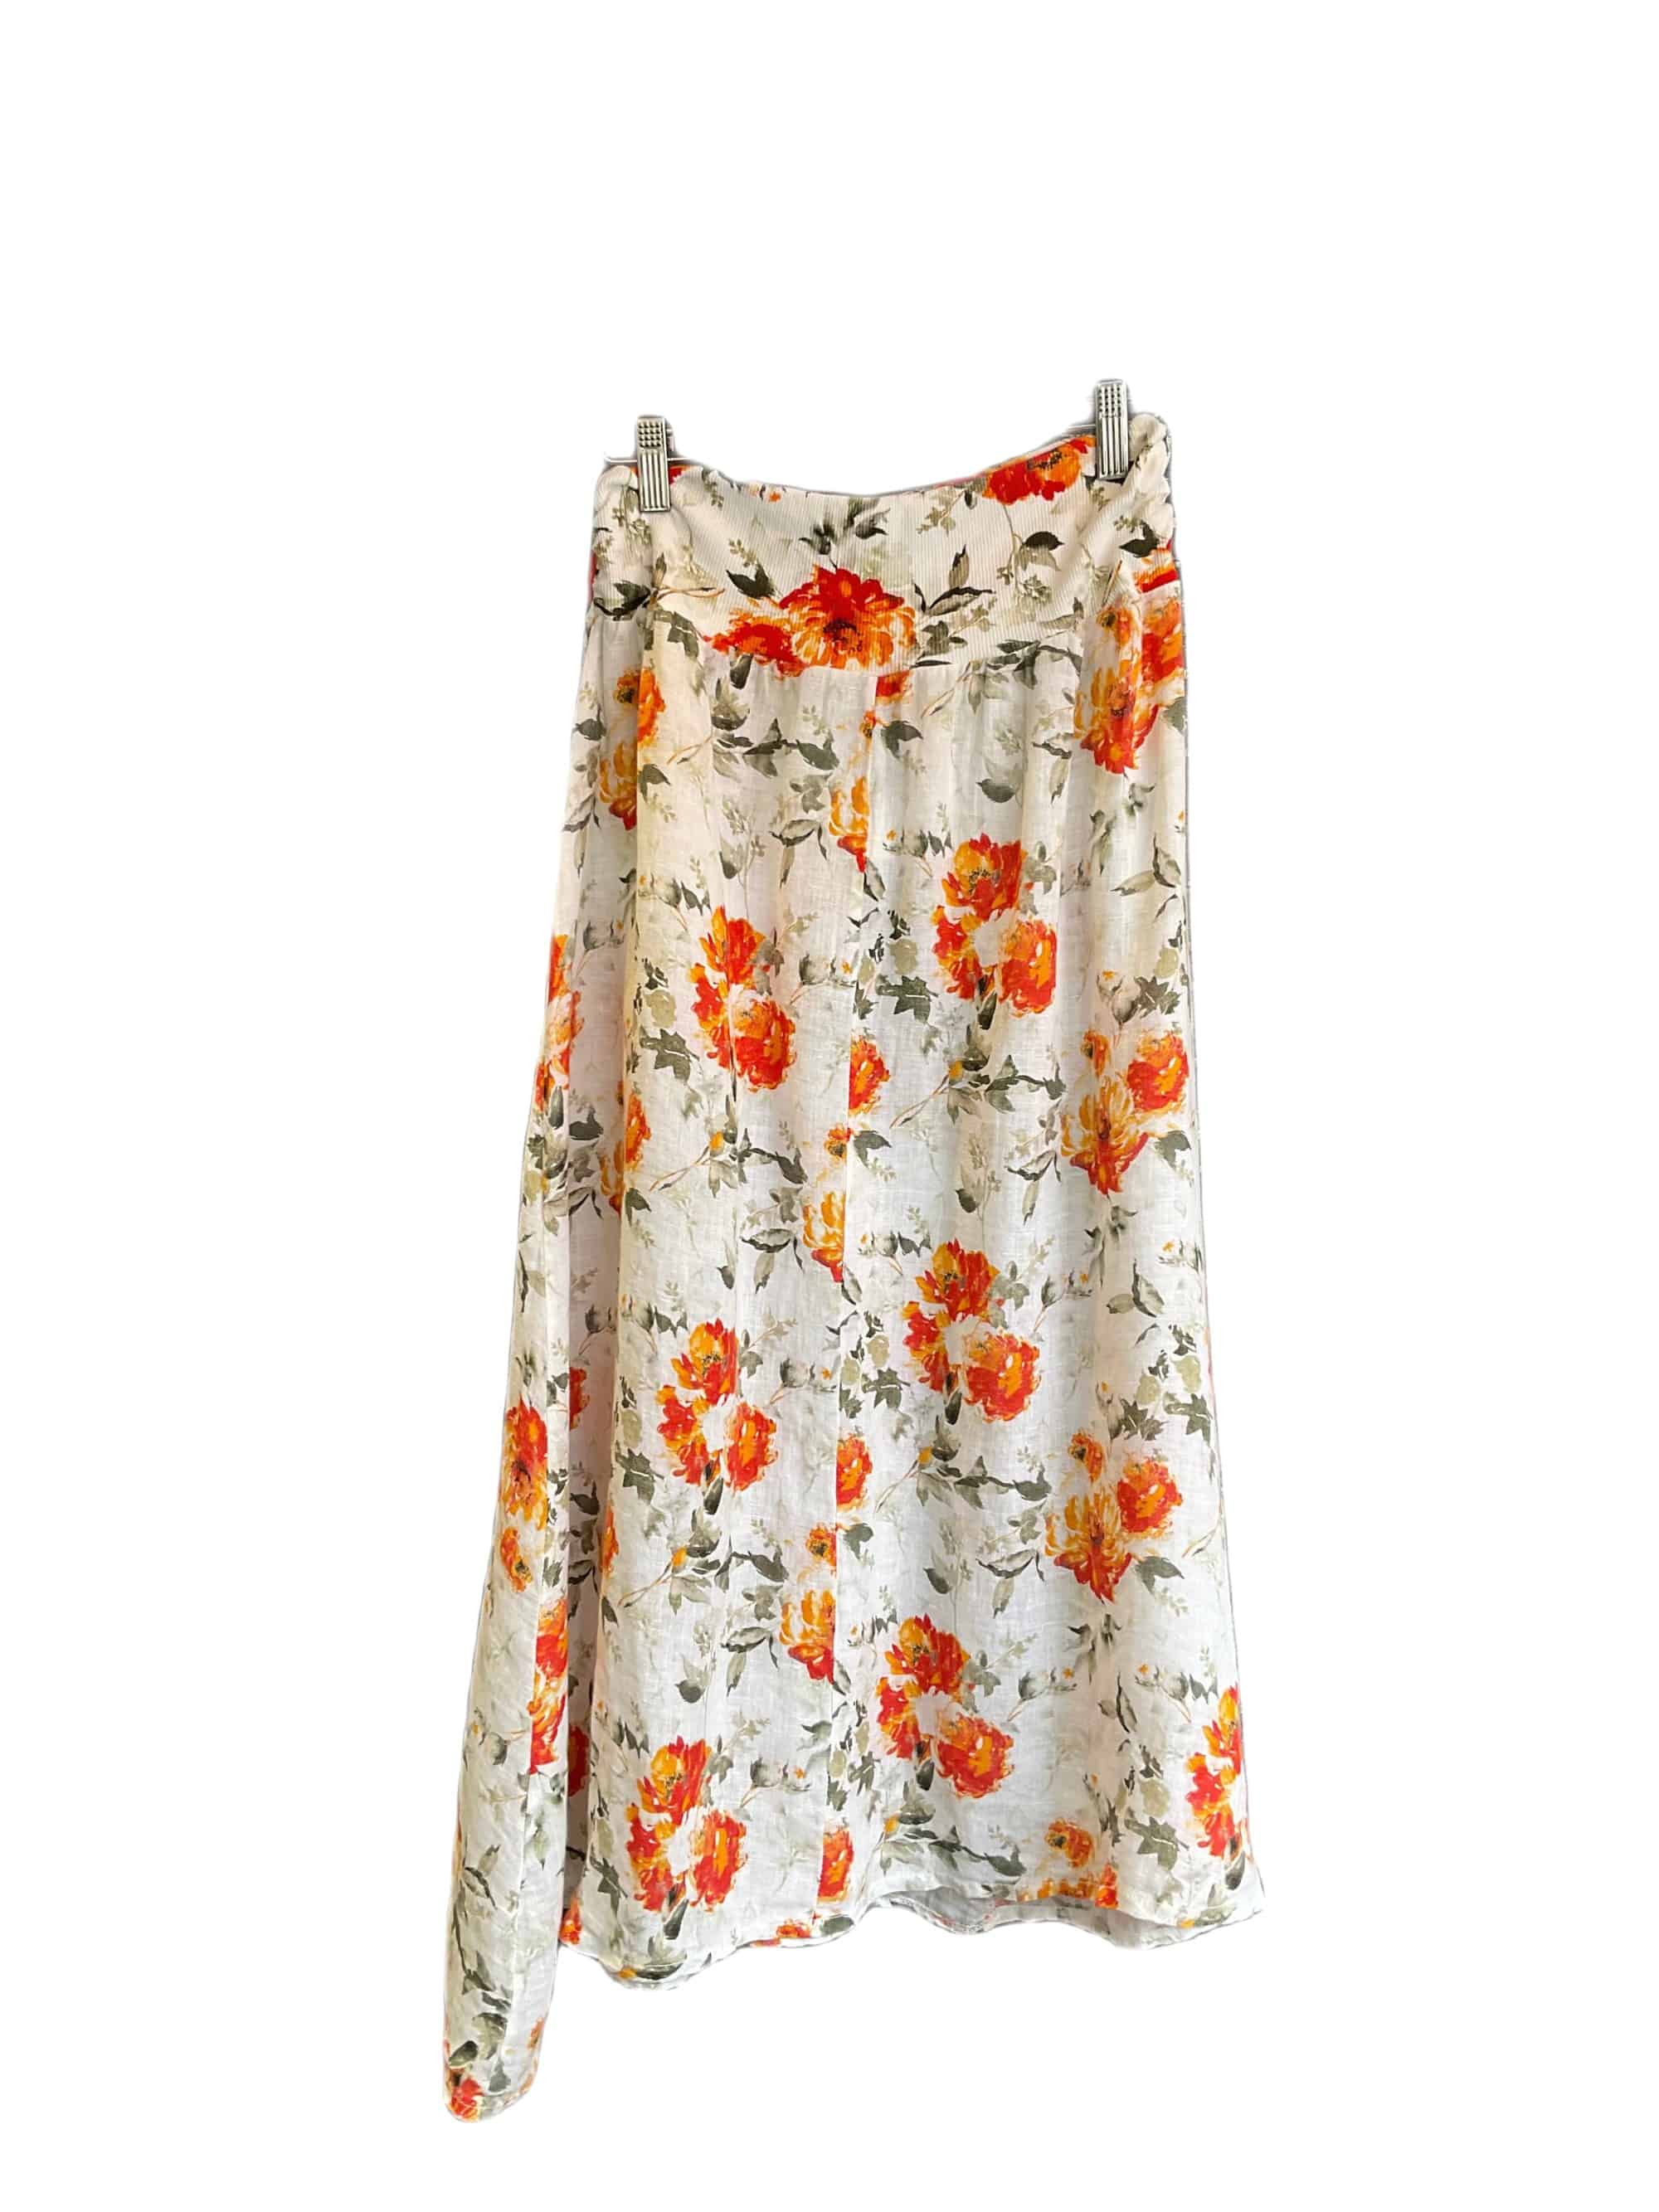 Inizio Linen Skirt in Floral - clever alice